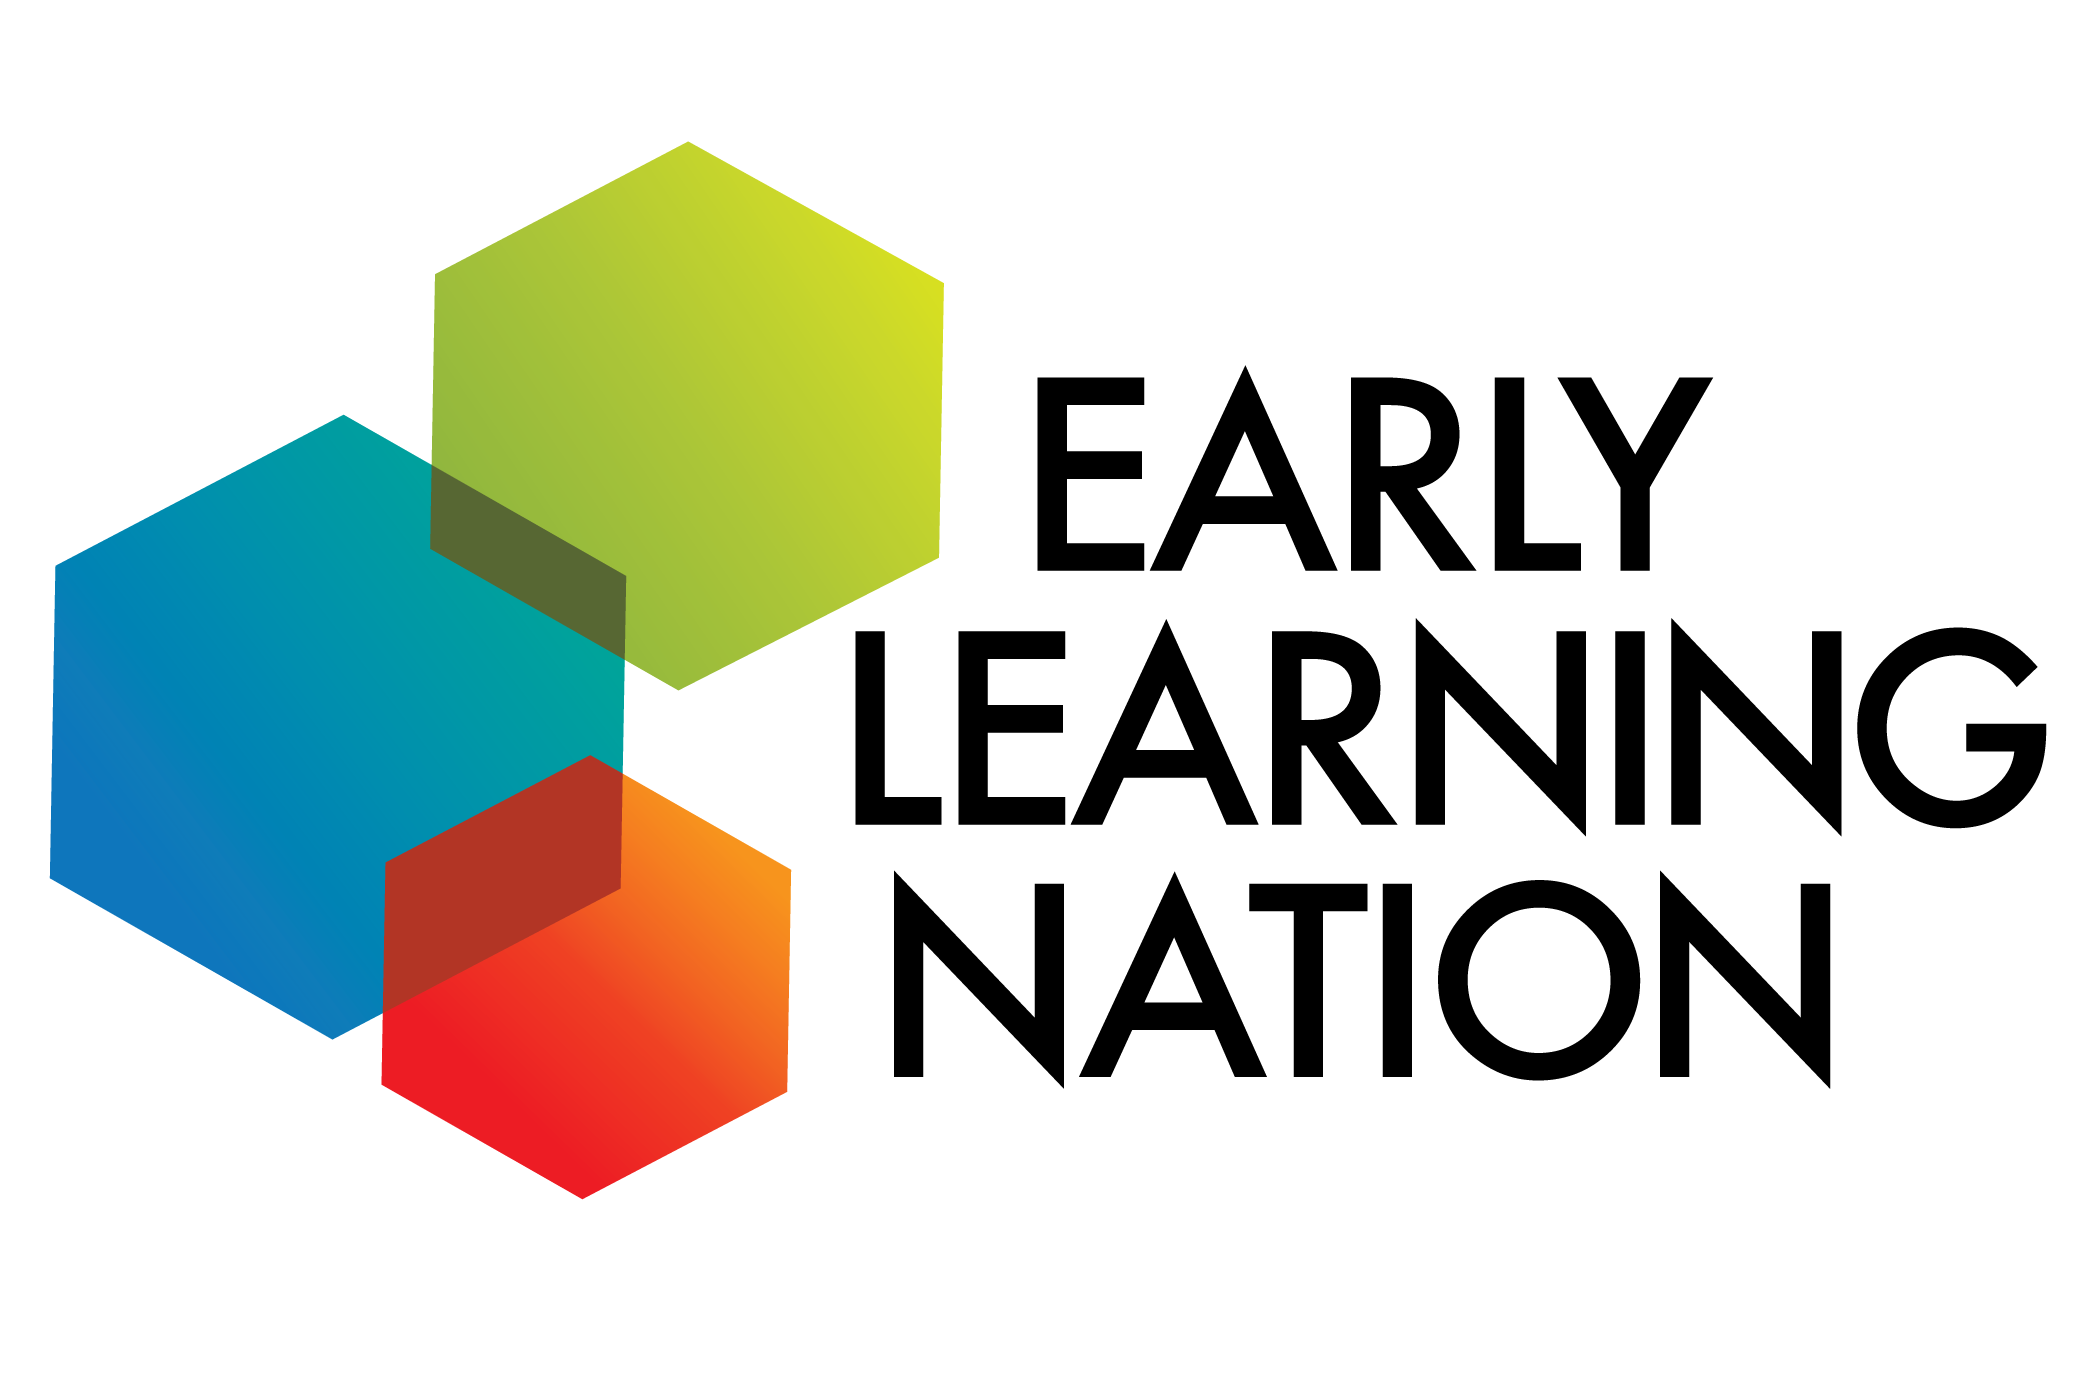 Early Learning Nation logo